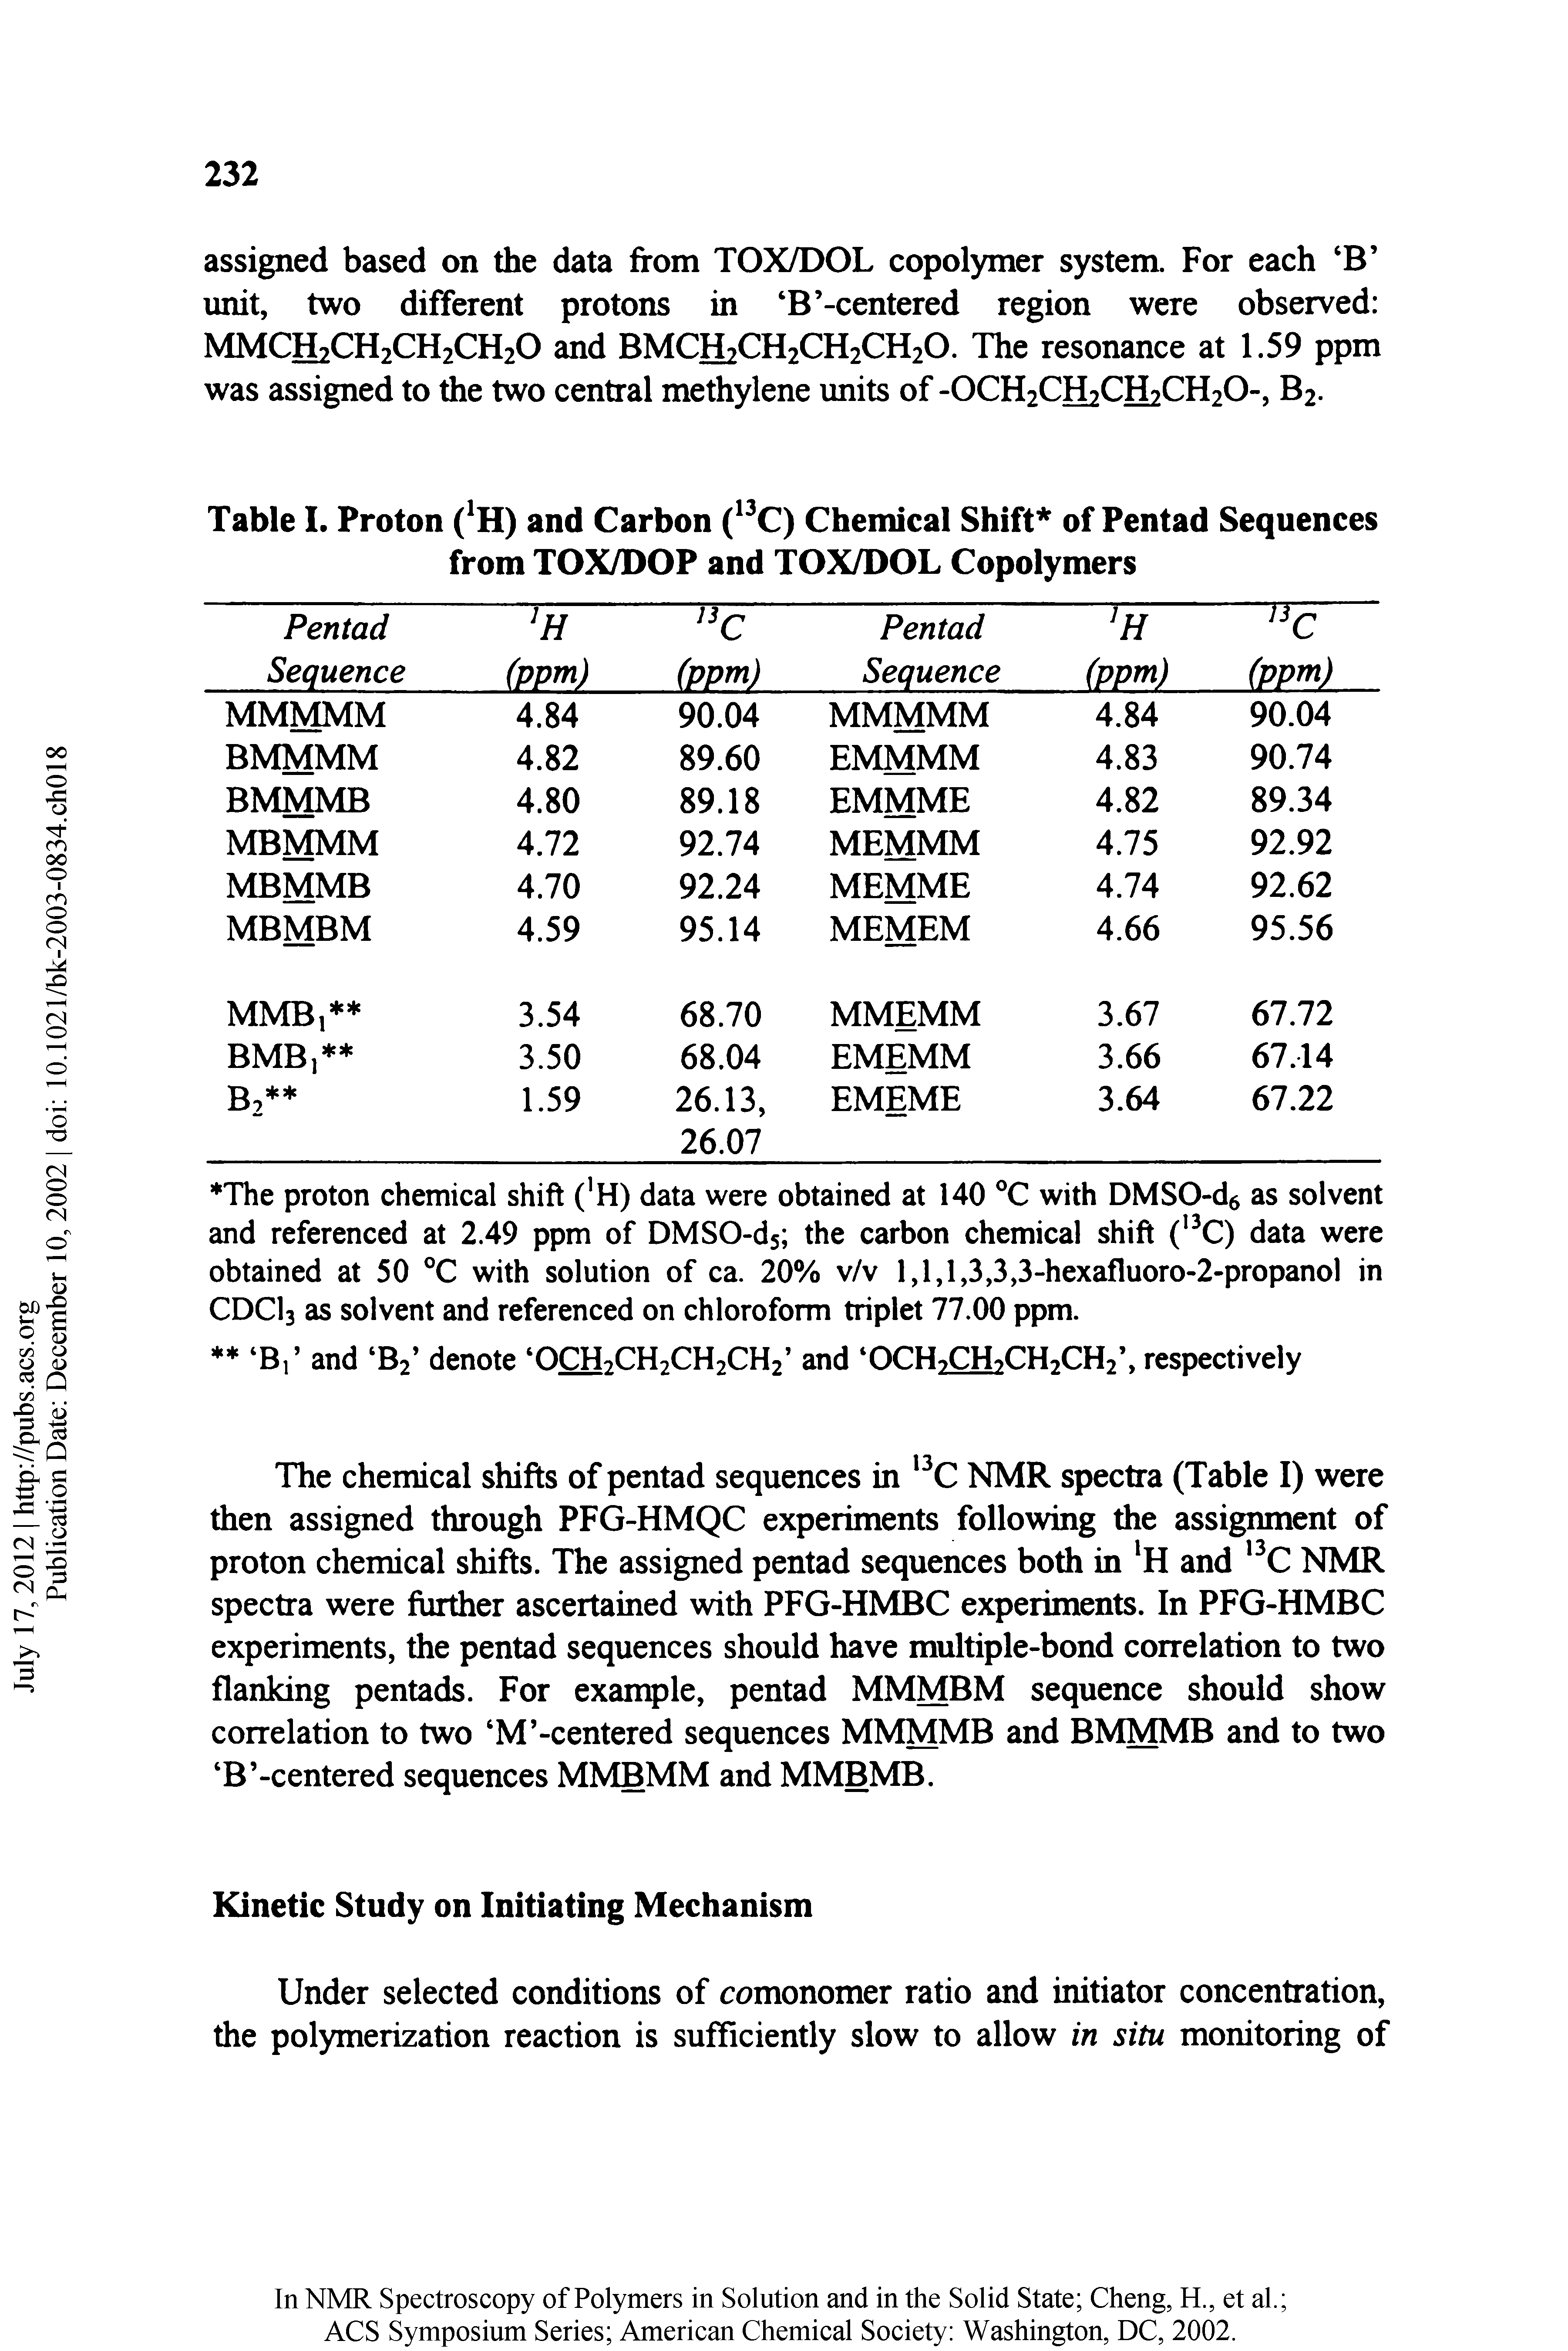 Table I. Proton ( H) and Carbon ( C) Chemical Shift of Pentad Sequences from TOX/DOP and TOX/DOL Copolymers...